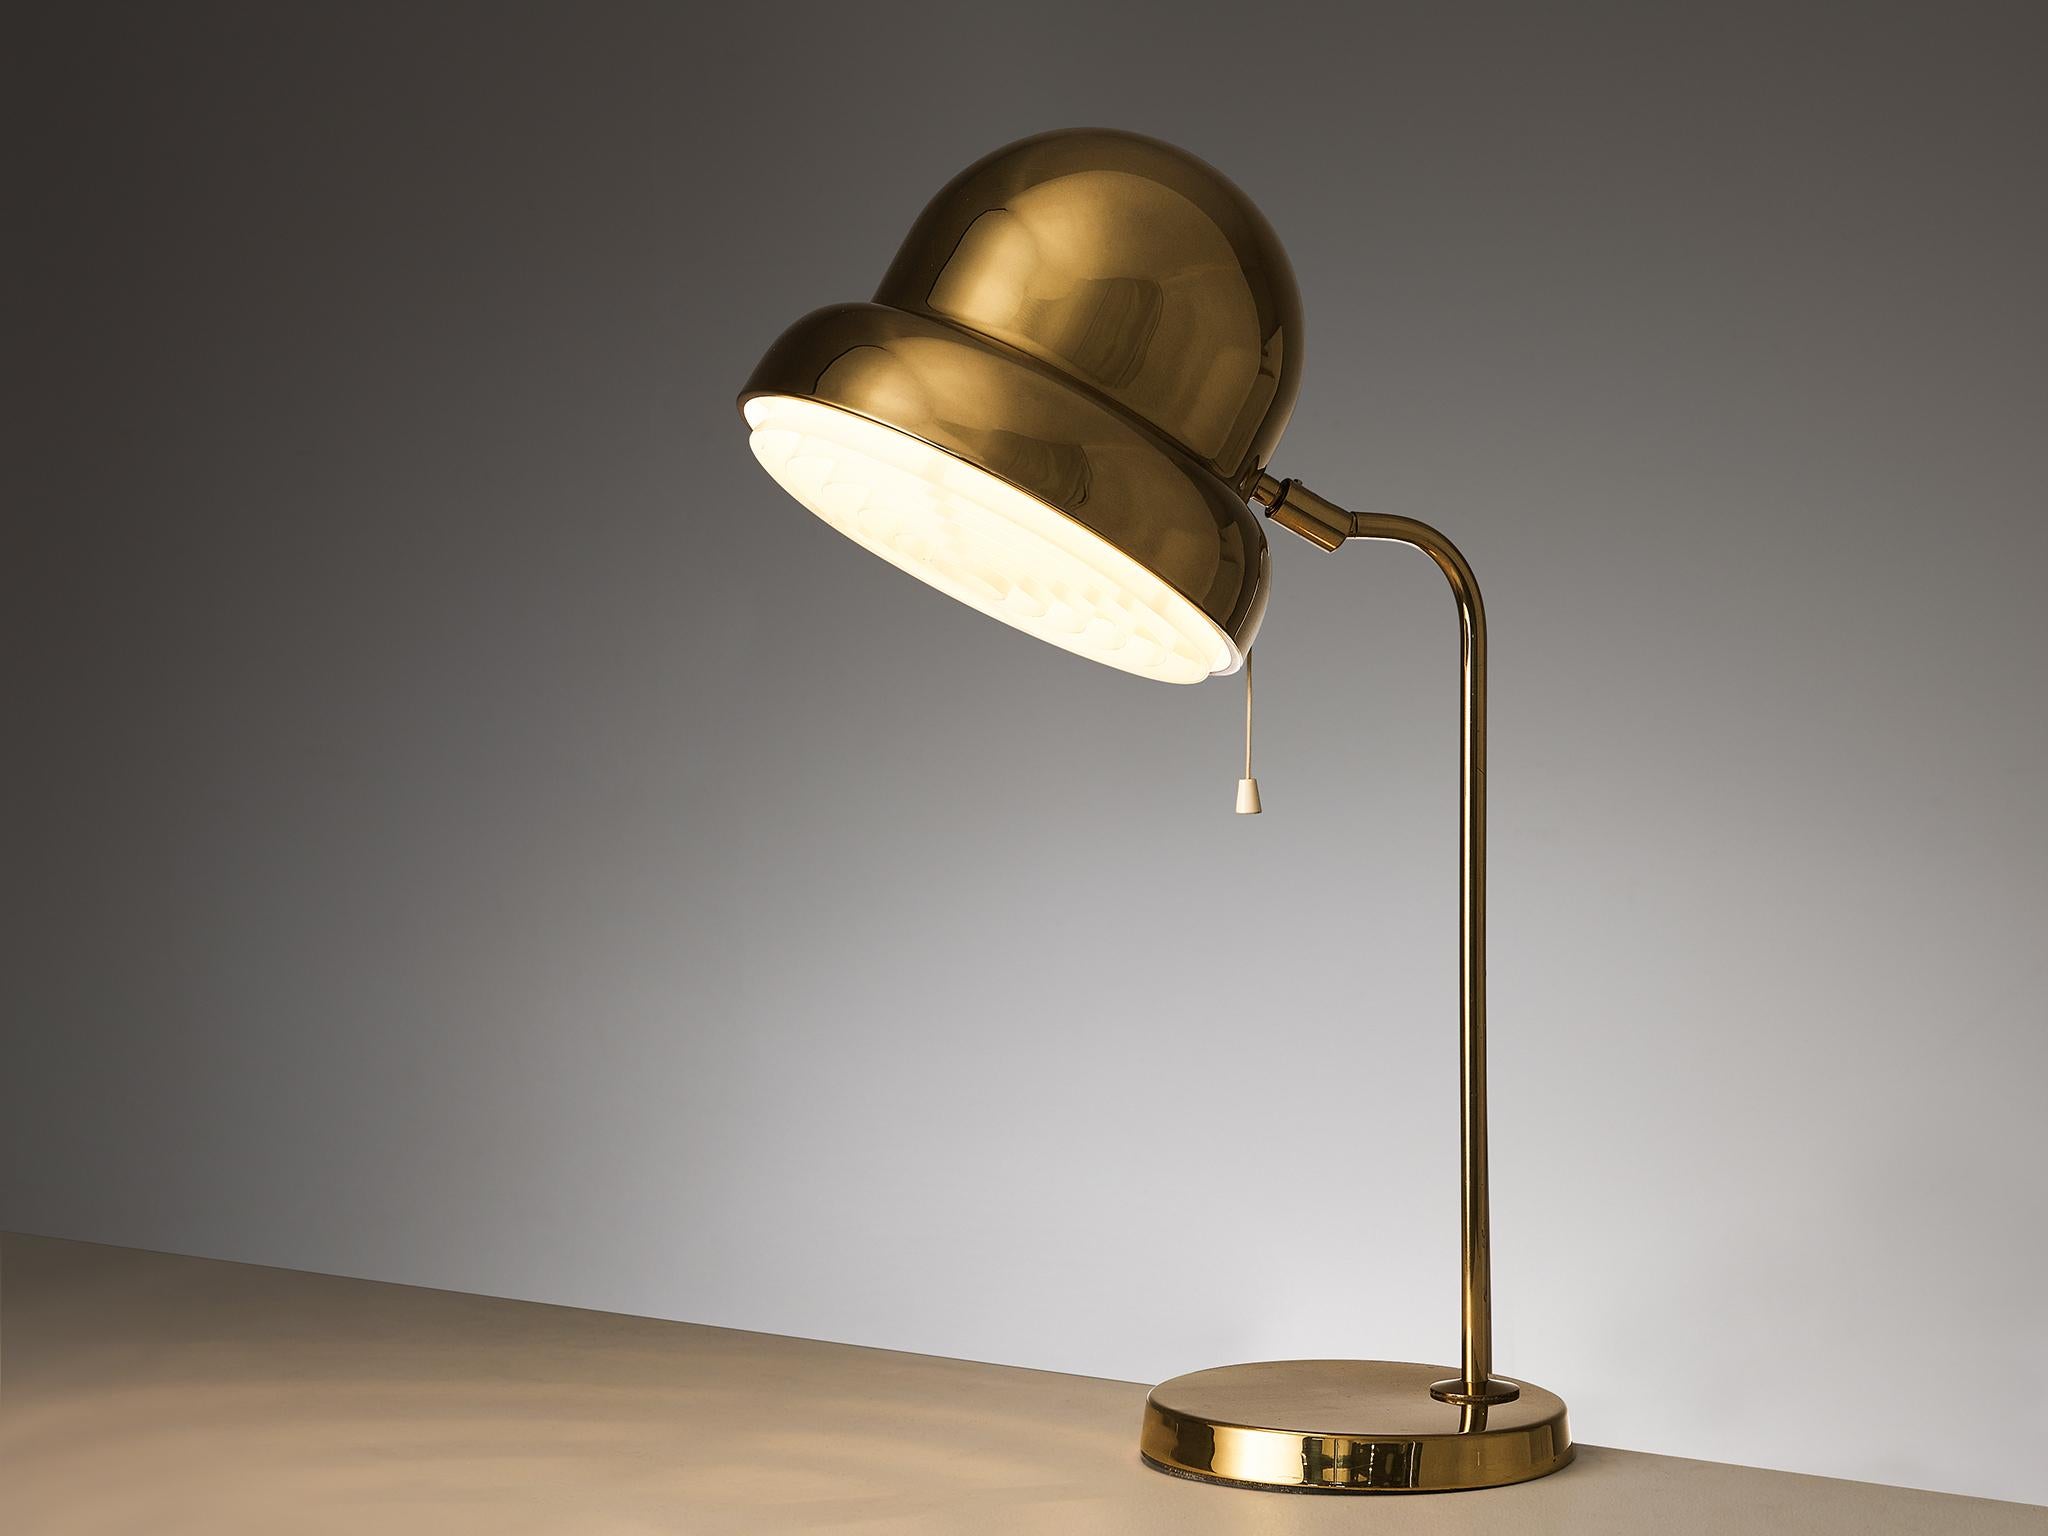 Bergboms, desk / table lamp model ‘B 120M’, metal, plastic, brass, Sweden, 1960s

This delicate table lamp of Swedish origin embodies a splendid construction of round shapes and delicate lines. The shade is well-executed showing a bell-shaped